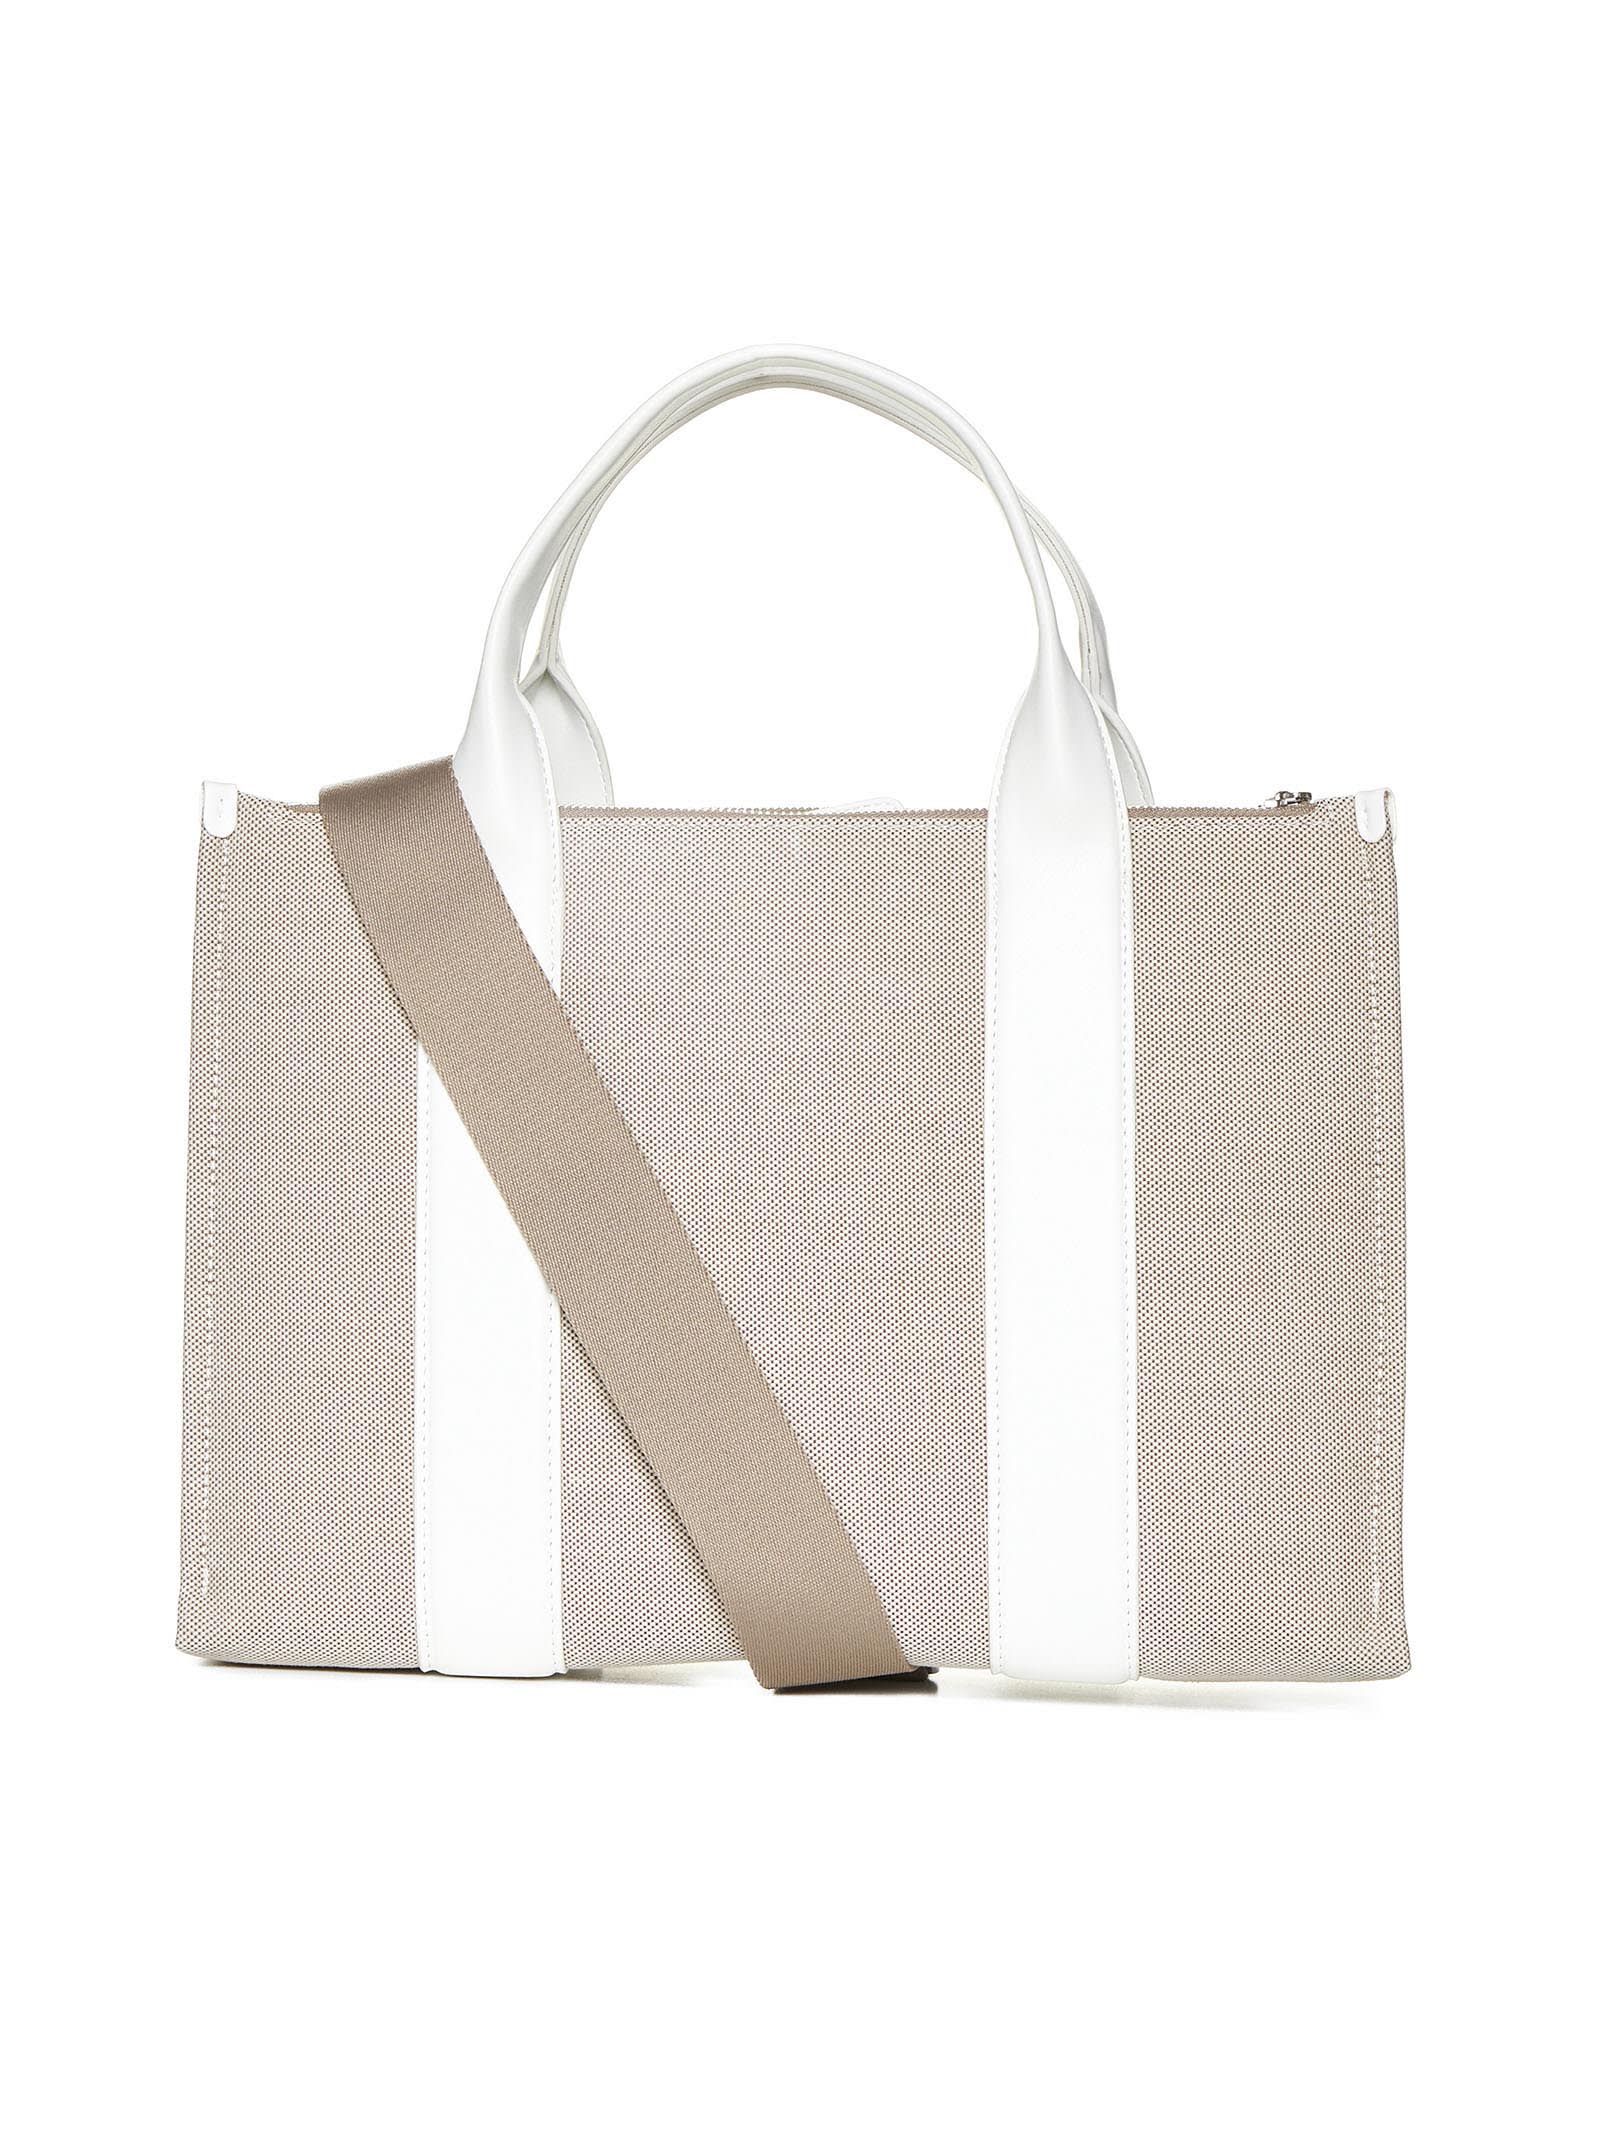 Shop Dkny Tote In Natural/white